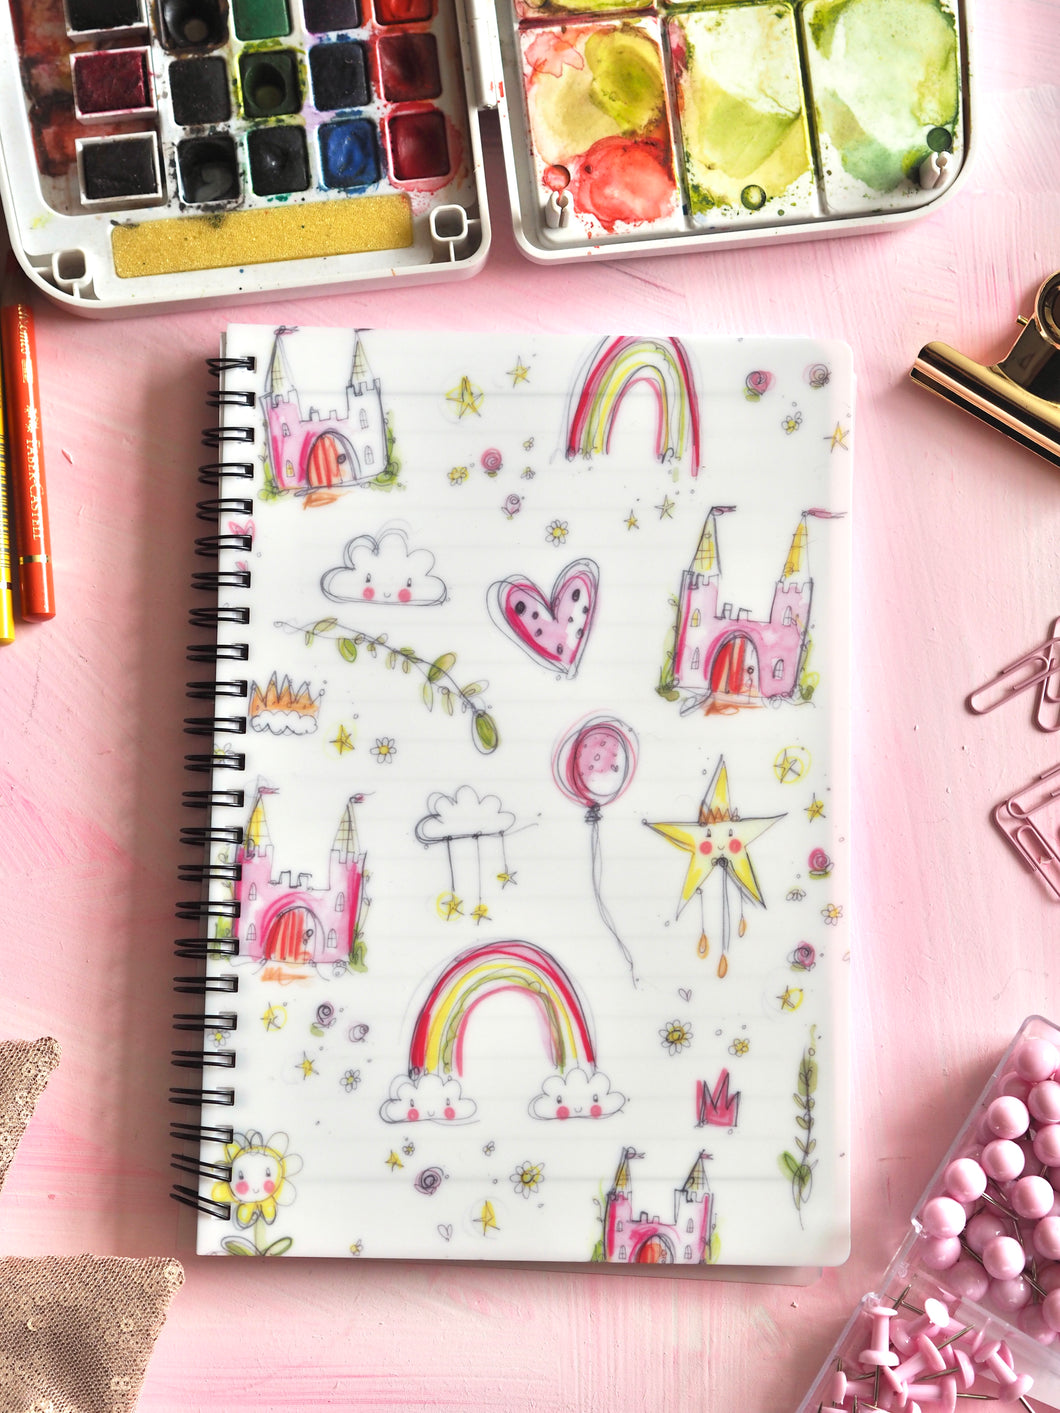 Made By Leah Pattern Spiral Notebook